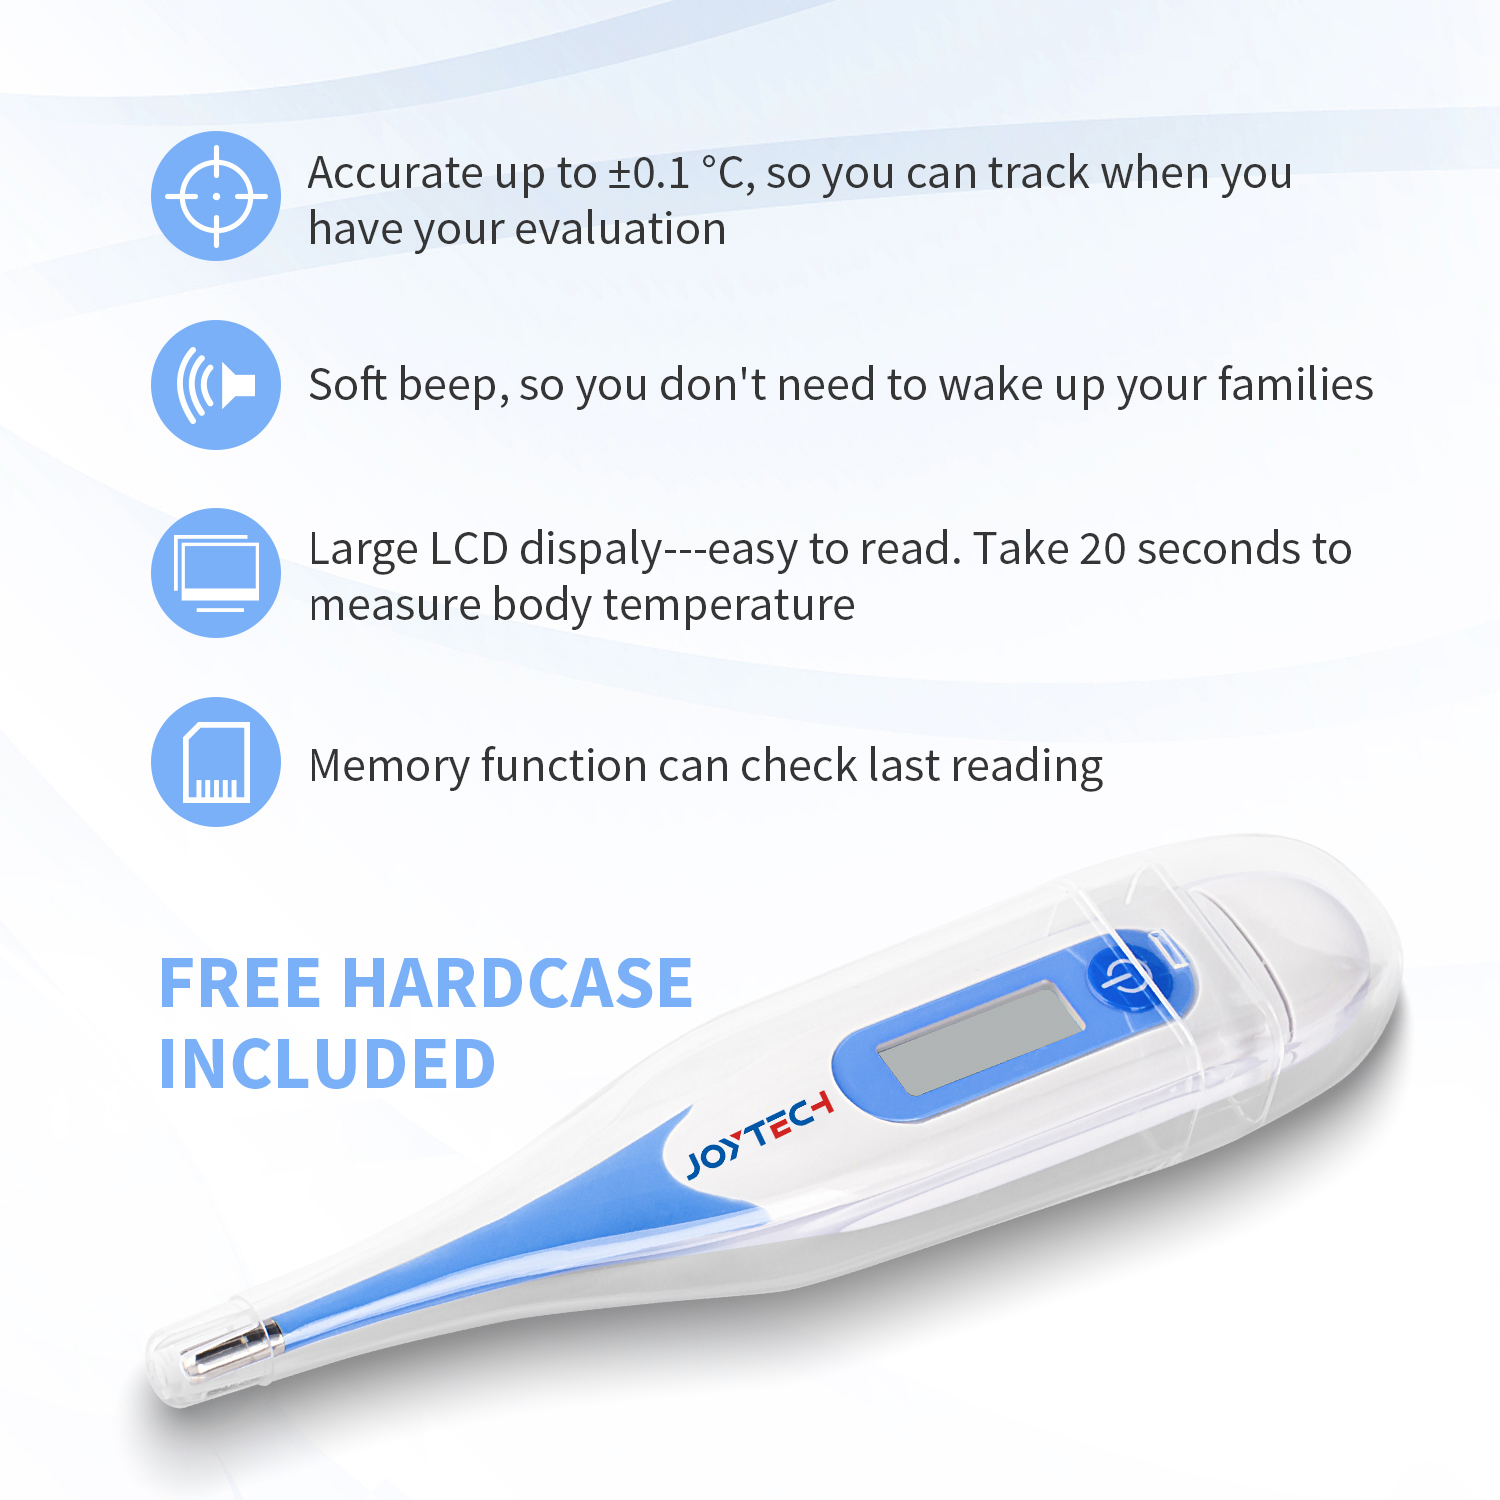 How does a thermometer work?